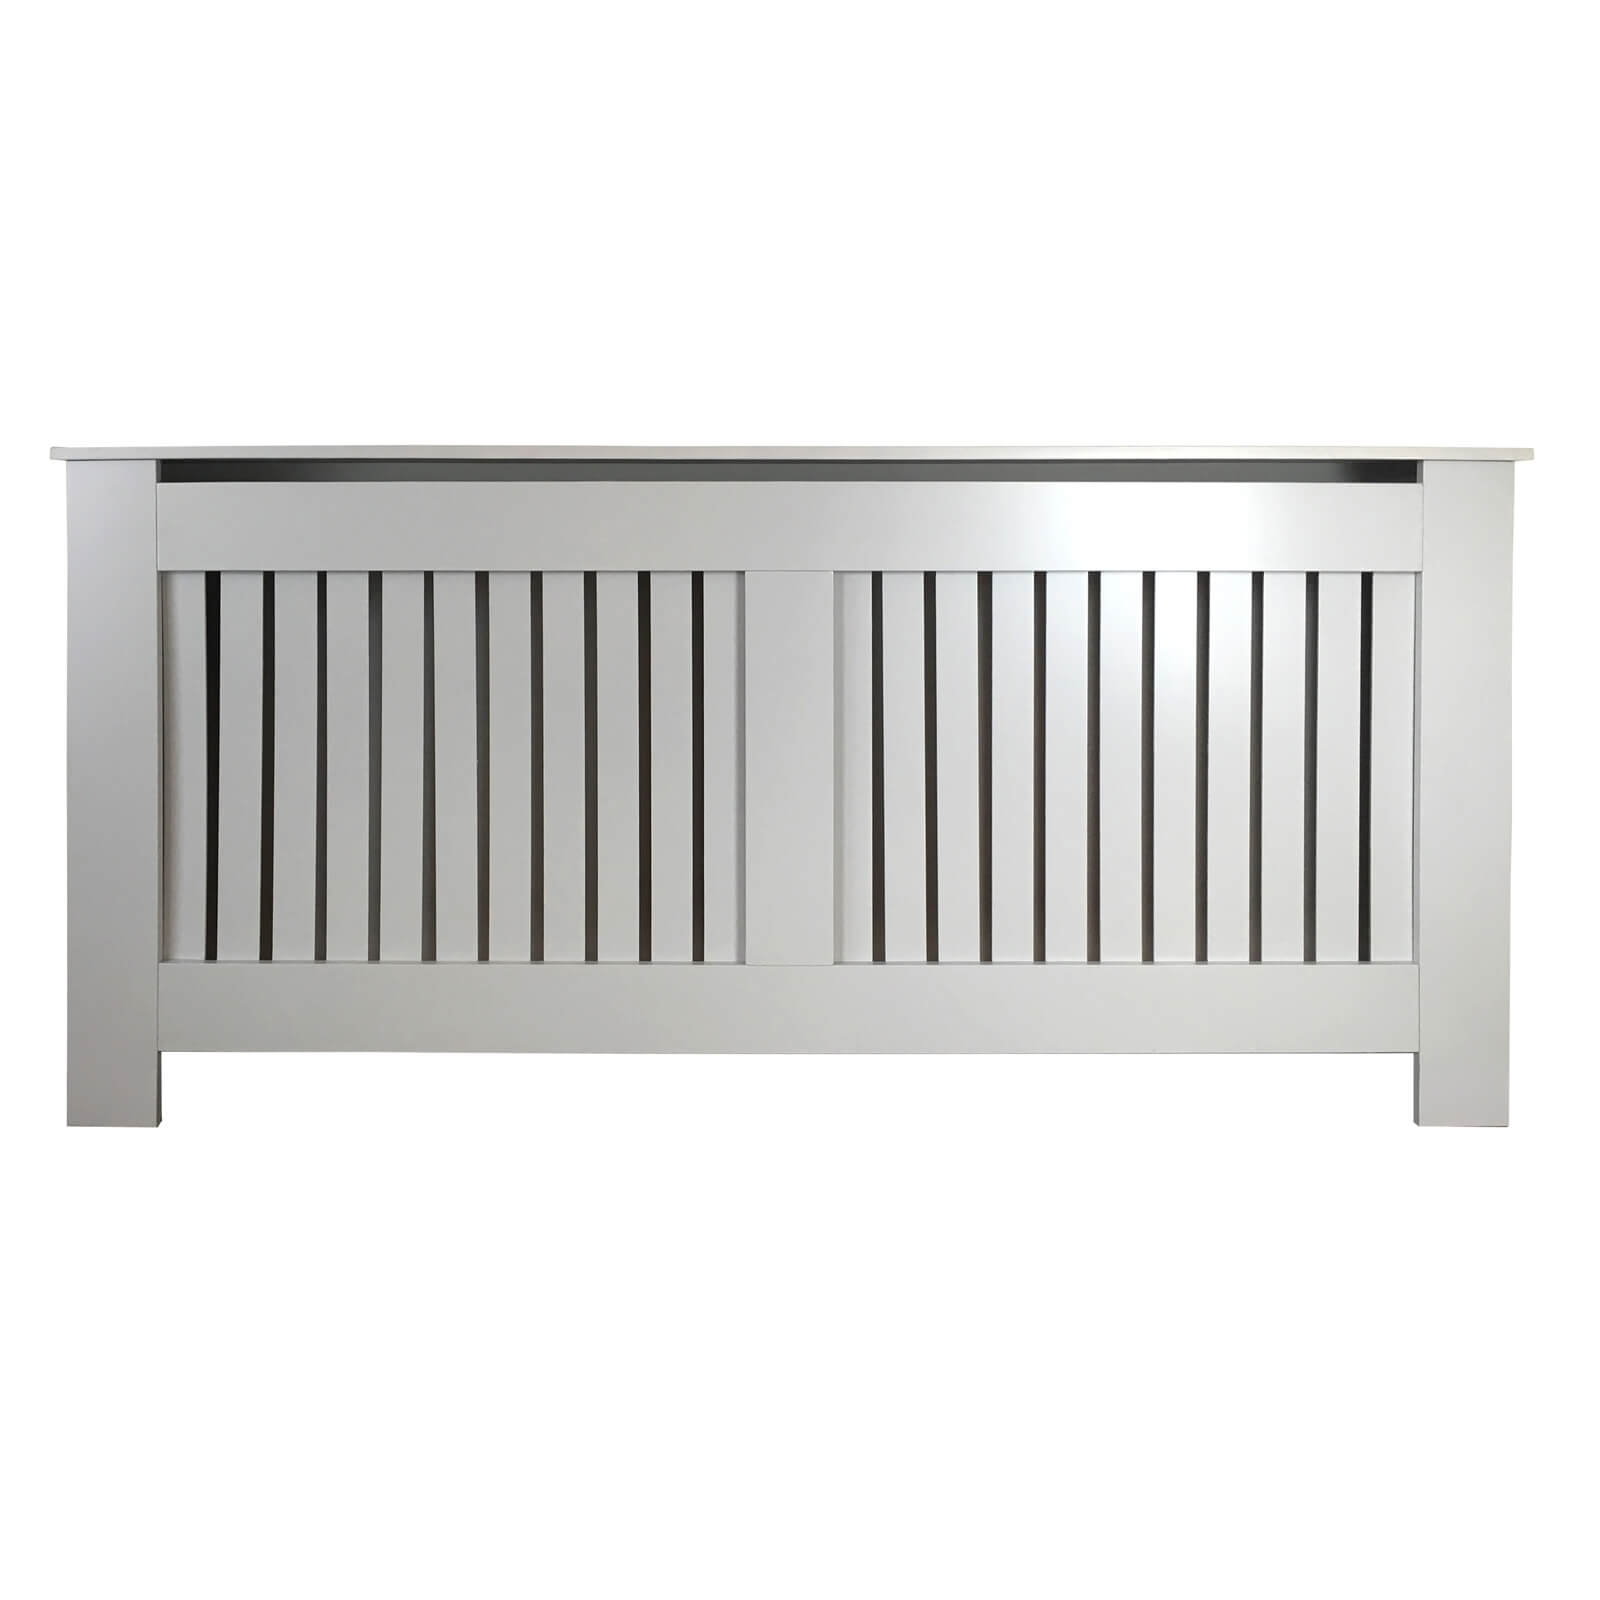 Radiator Cover with Vertical Slatted Design in Grey - Extra Large